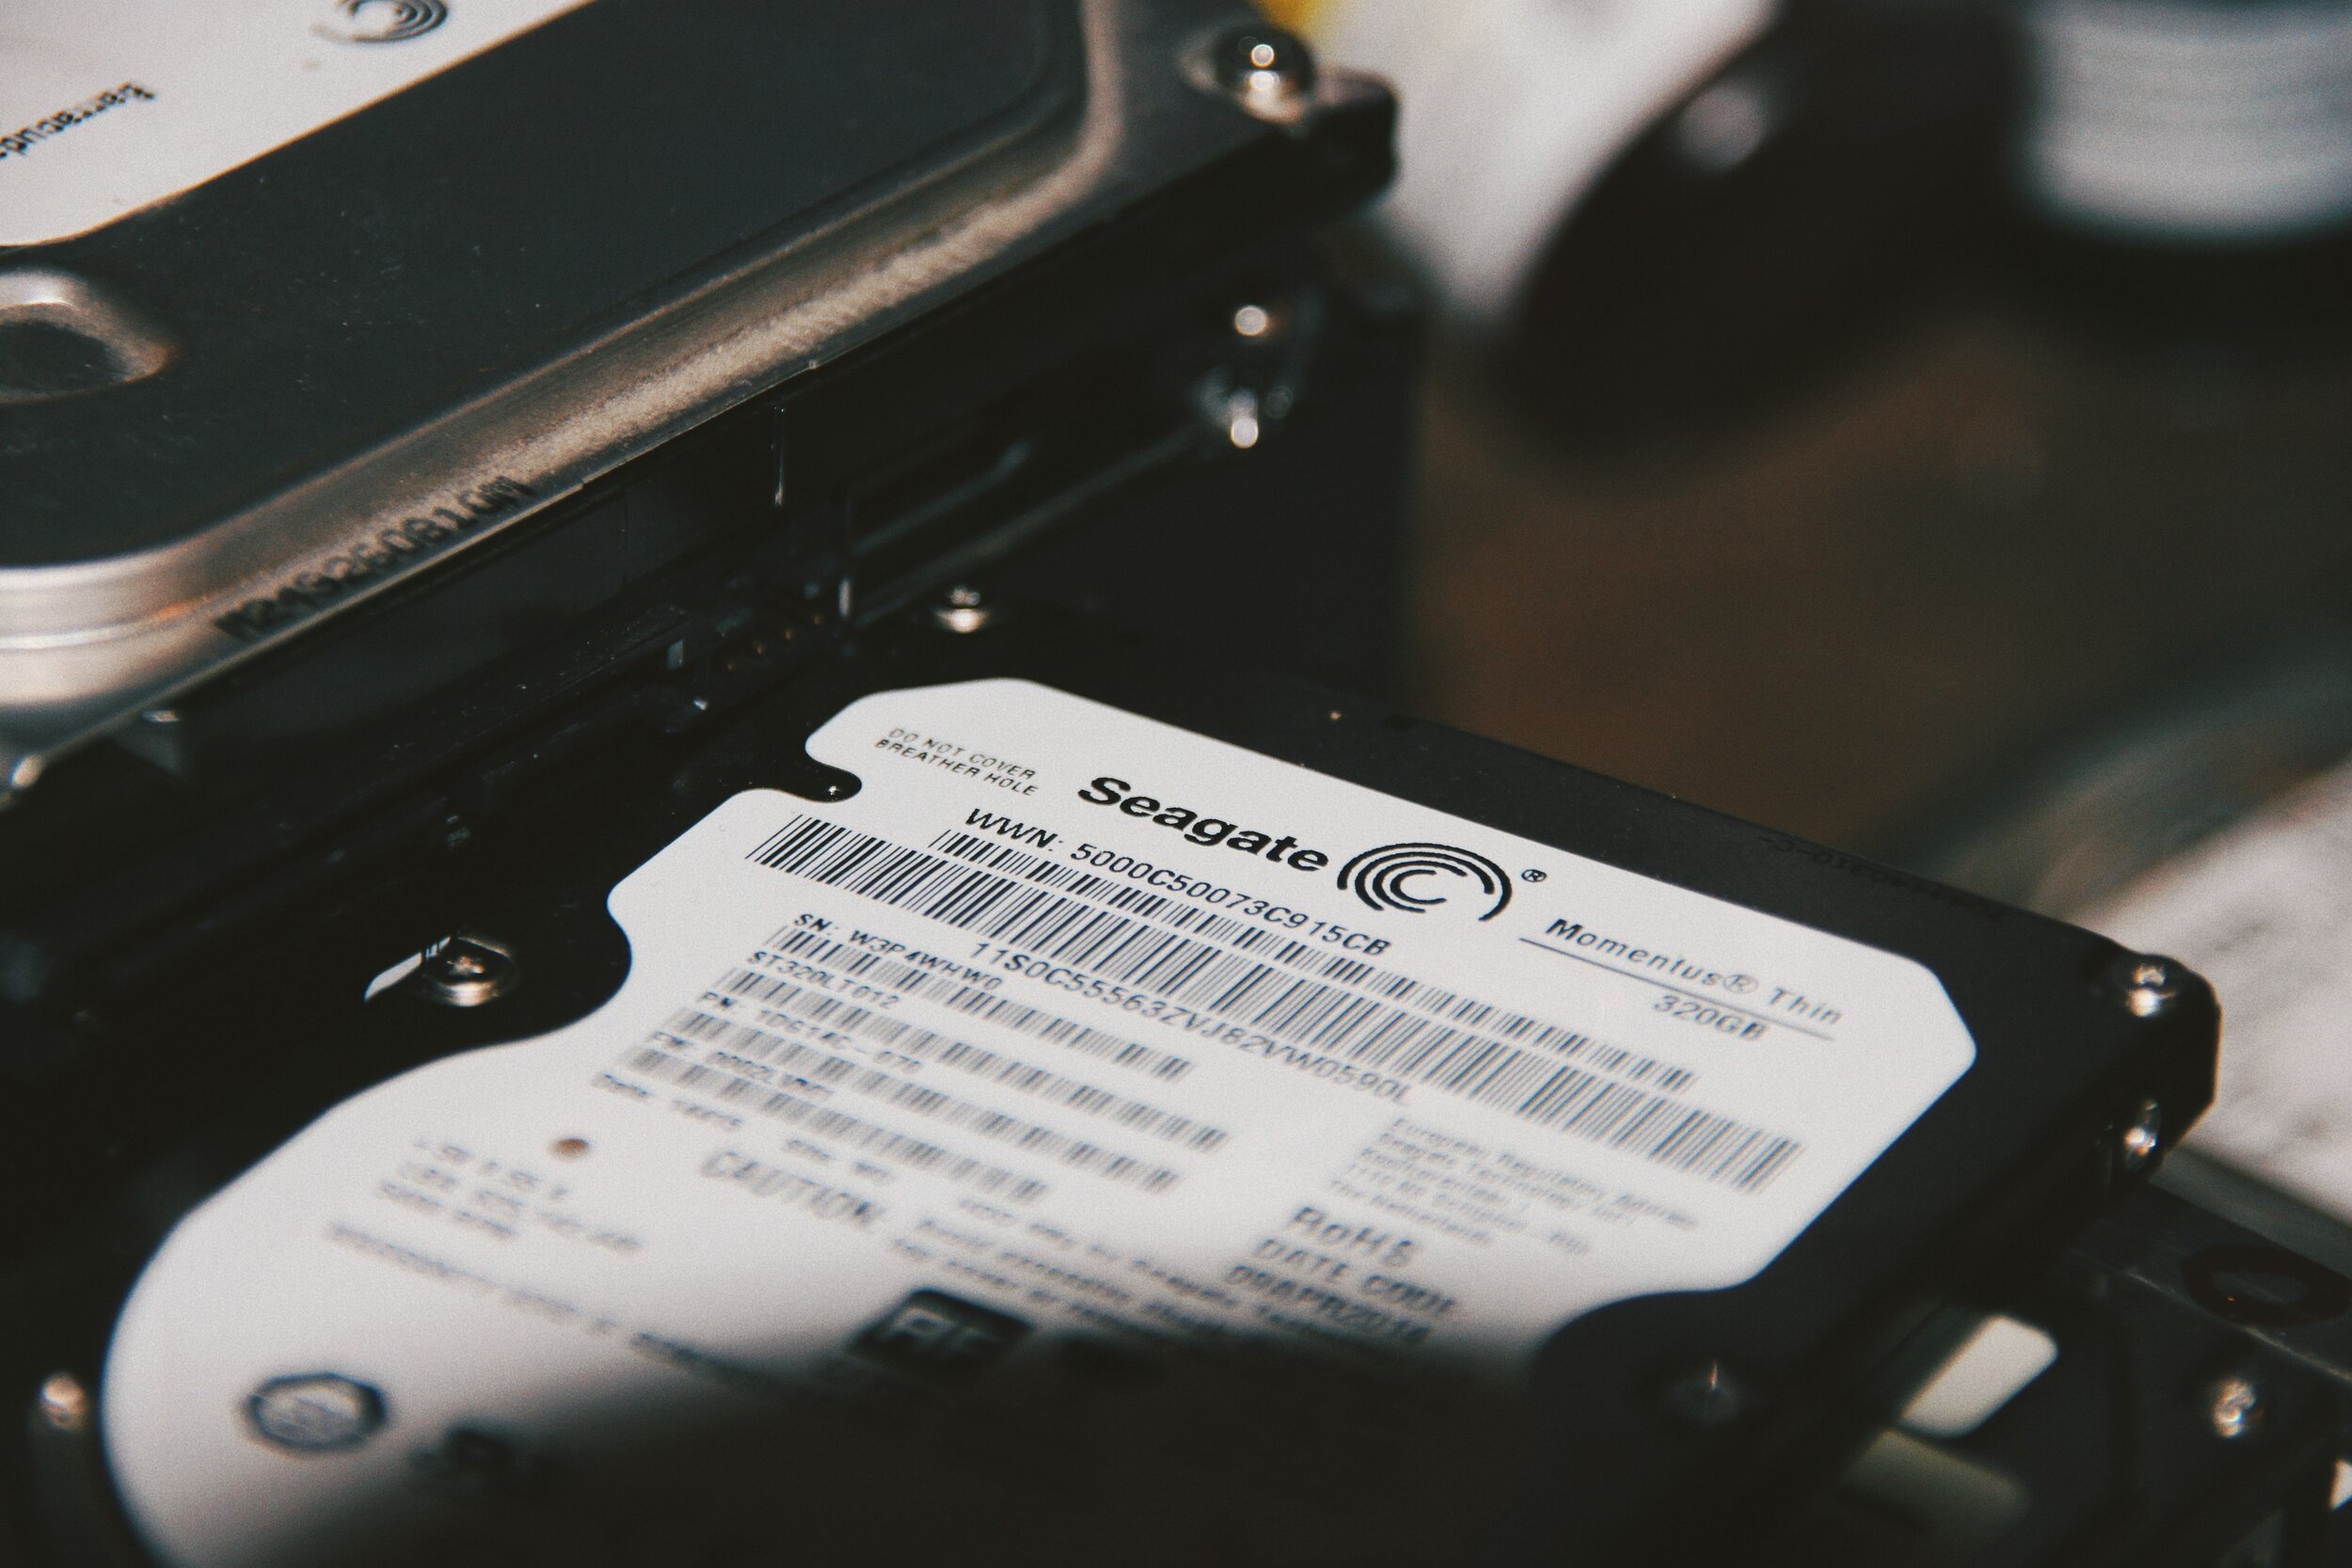 SSDs And Storage Drives For Your Studio